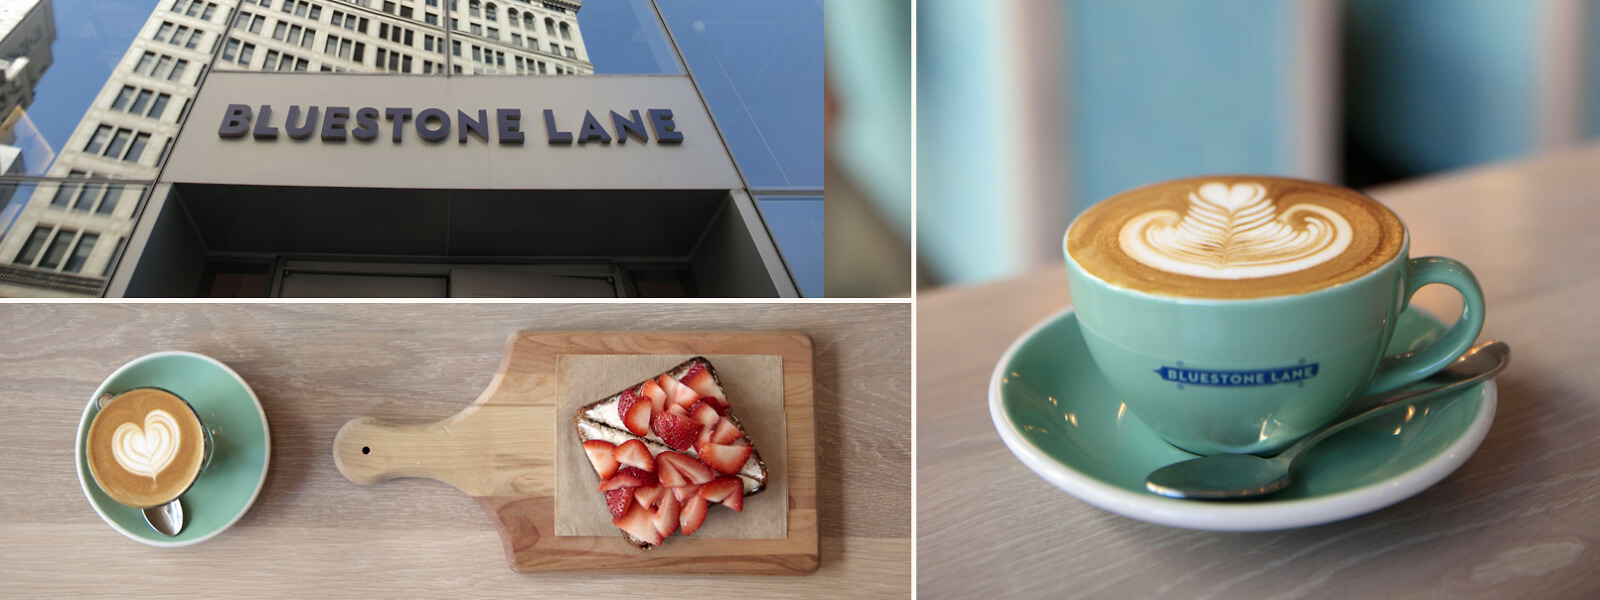 Exterior of Bluestone Lane with a flat white image and an aerial shot of strawberry toast and a latte.